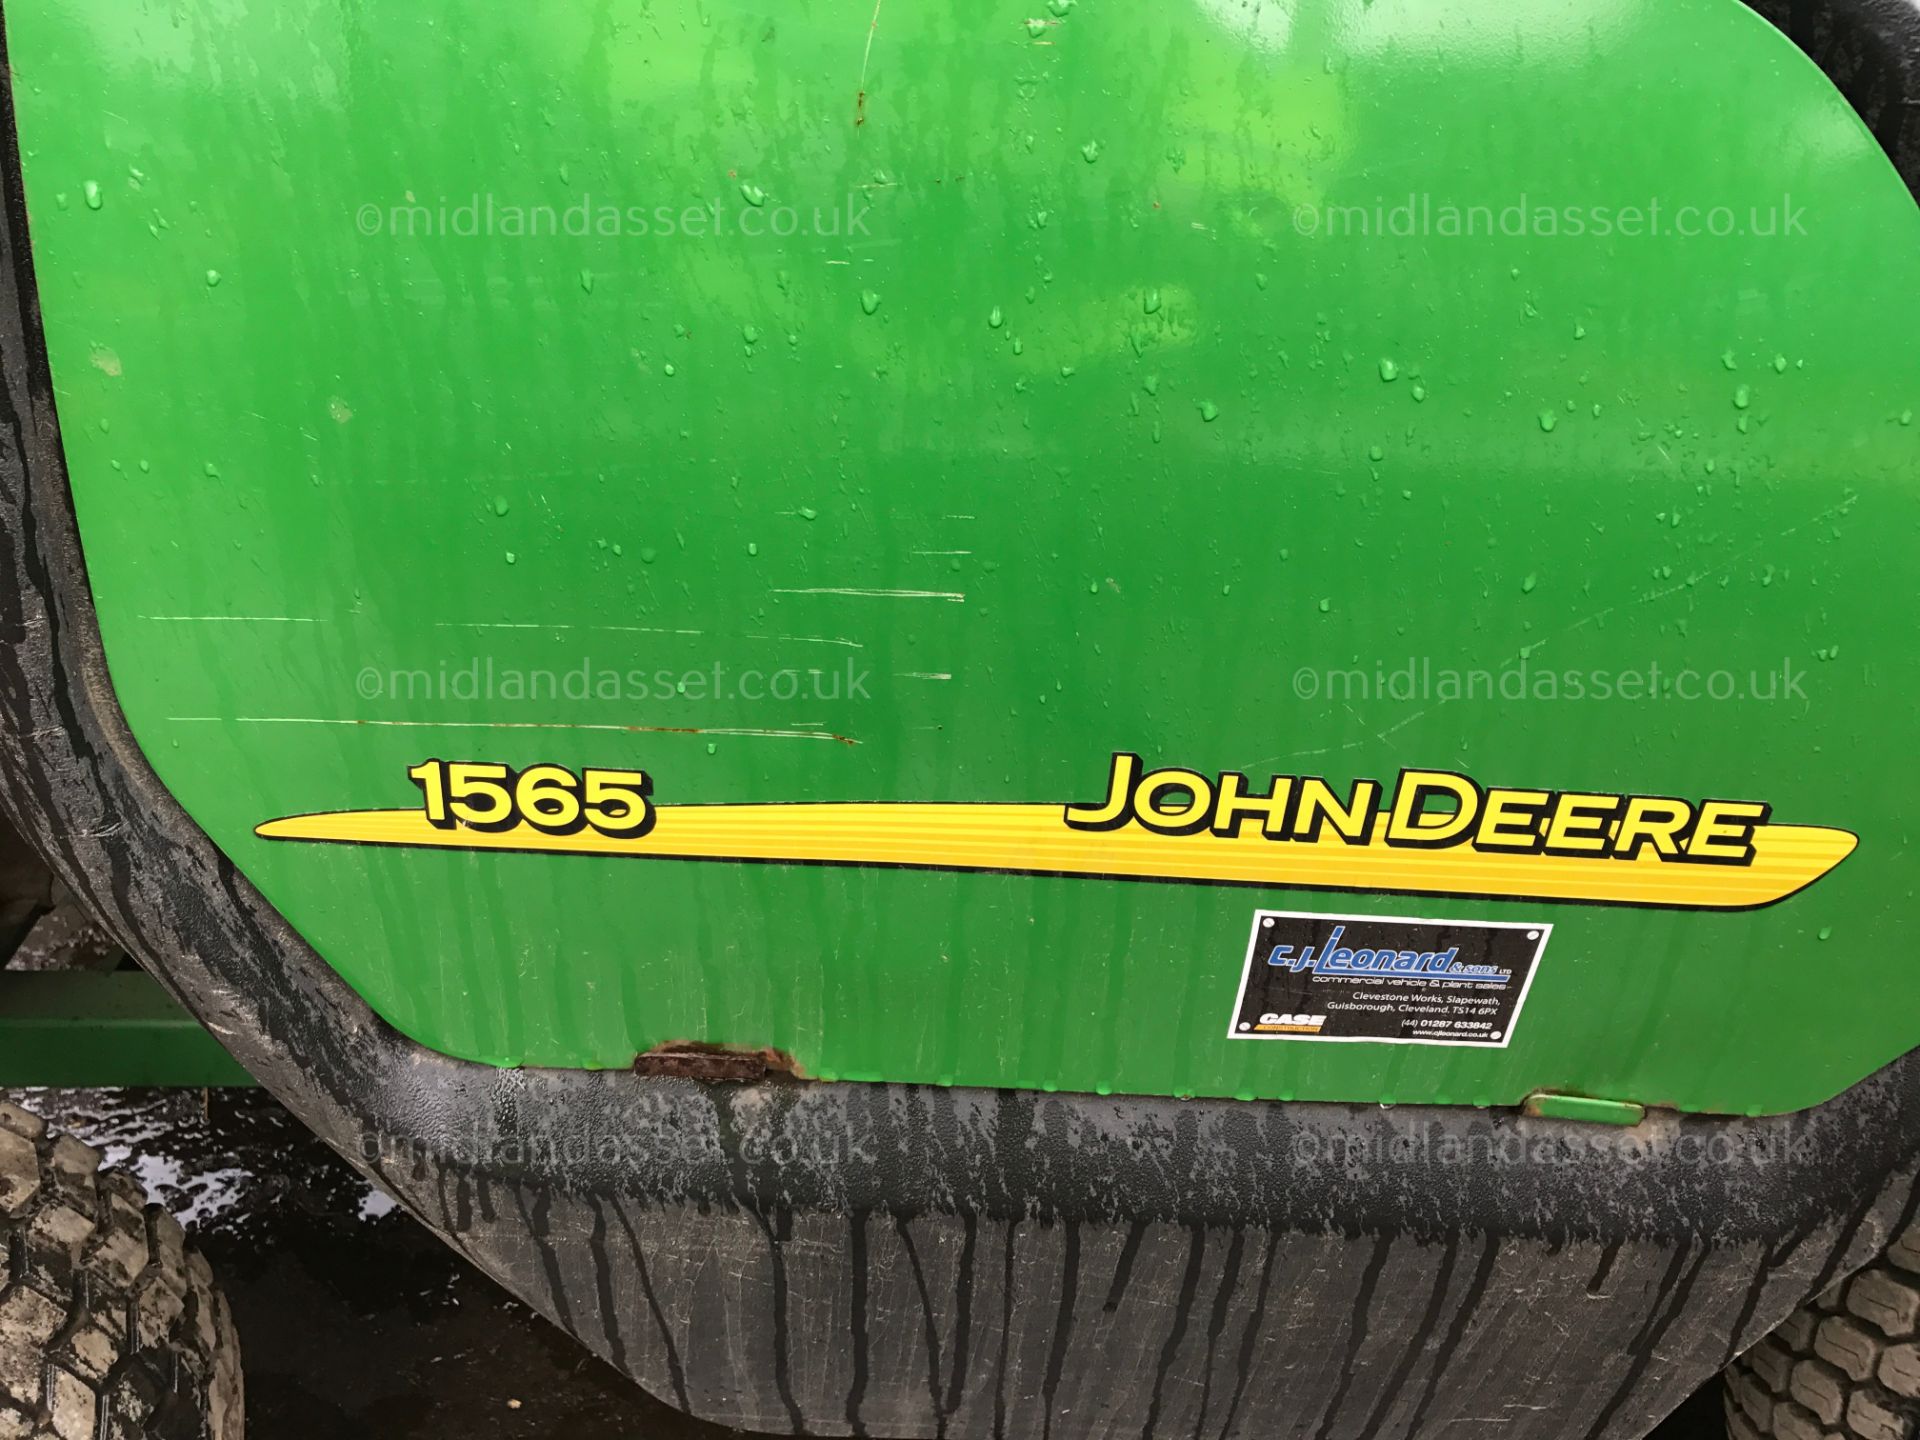 DS - 2008 JOHN DEERE FASTBAC RIDE ON MOWER   YEAR OF MANUFACTURE: 2008 MODEL: 1565 TOTAL PERMISSABLE - Image 4 of 9